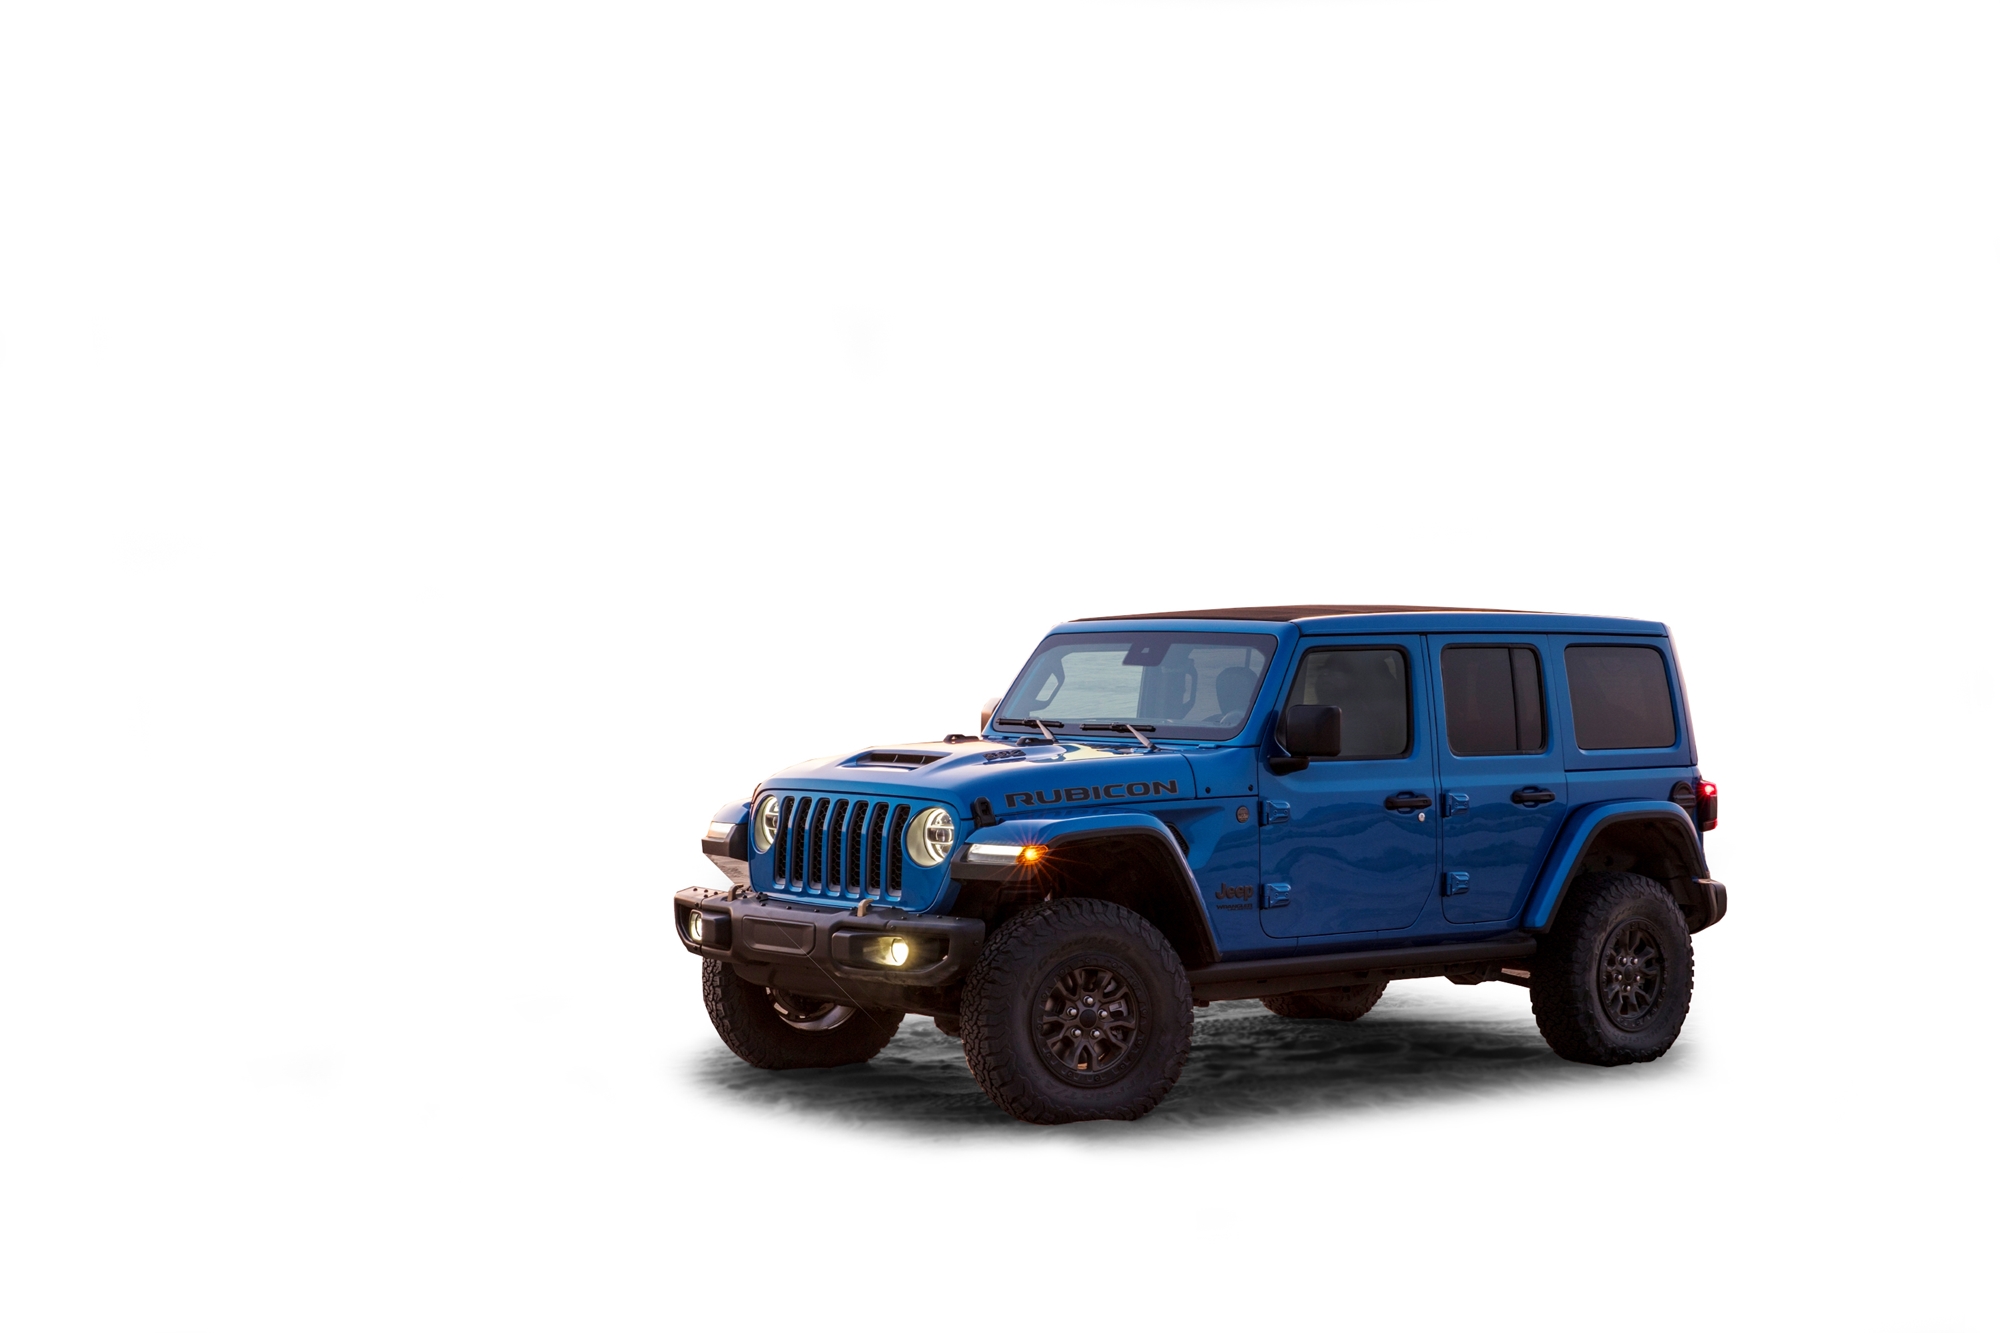 2021 Jeep Wrangler Rubicon 392 Full Specs, Features and Price | CarBuzz